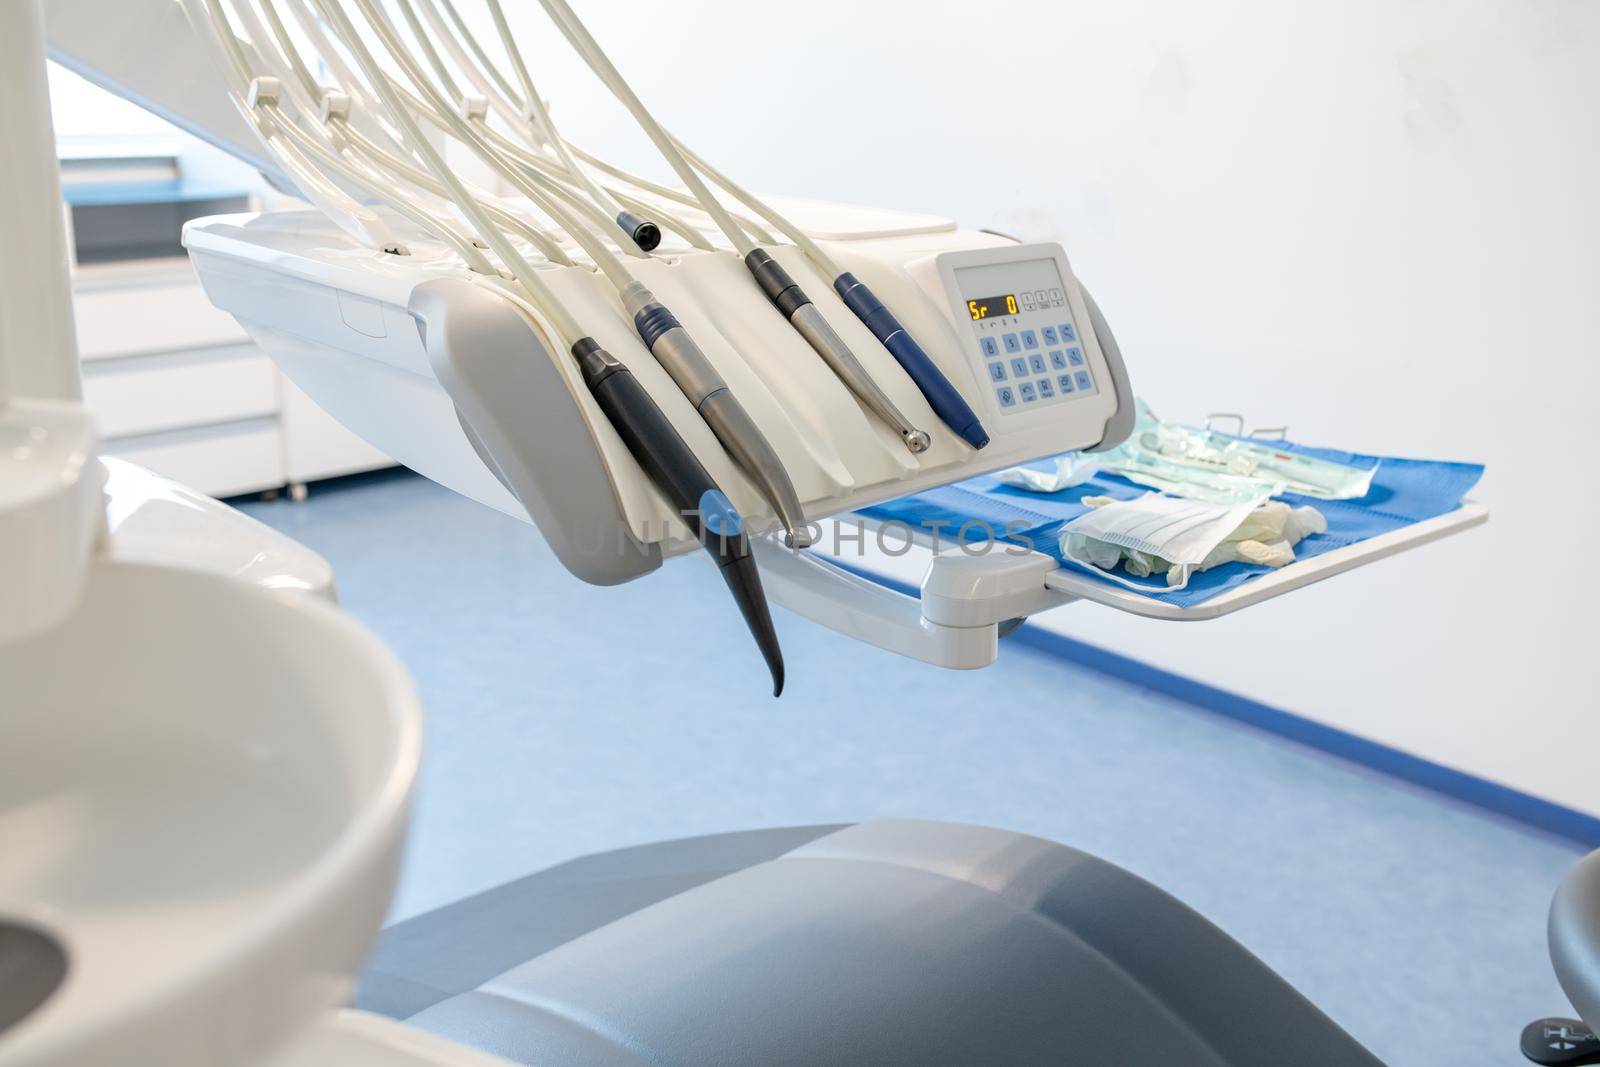 Modern dental practice. Dental chair and other accessories used by dentists by Sonat